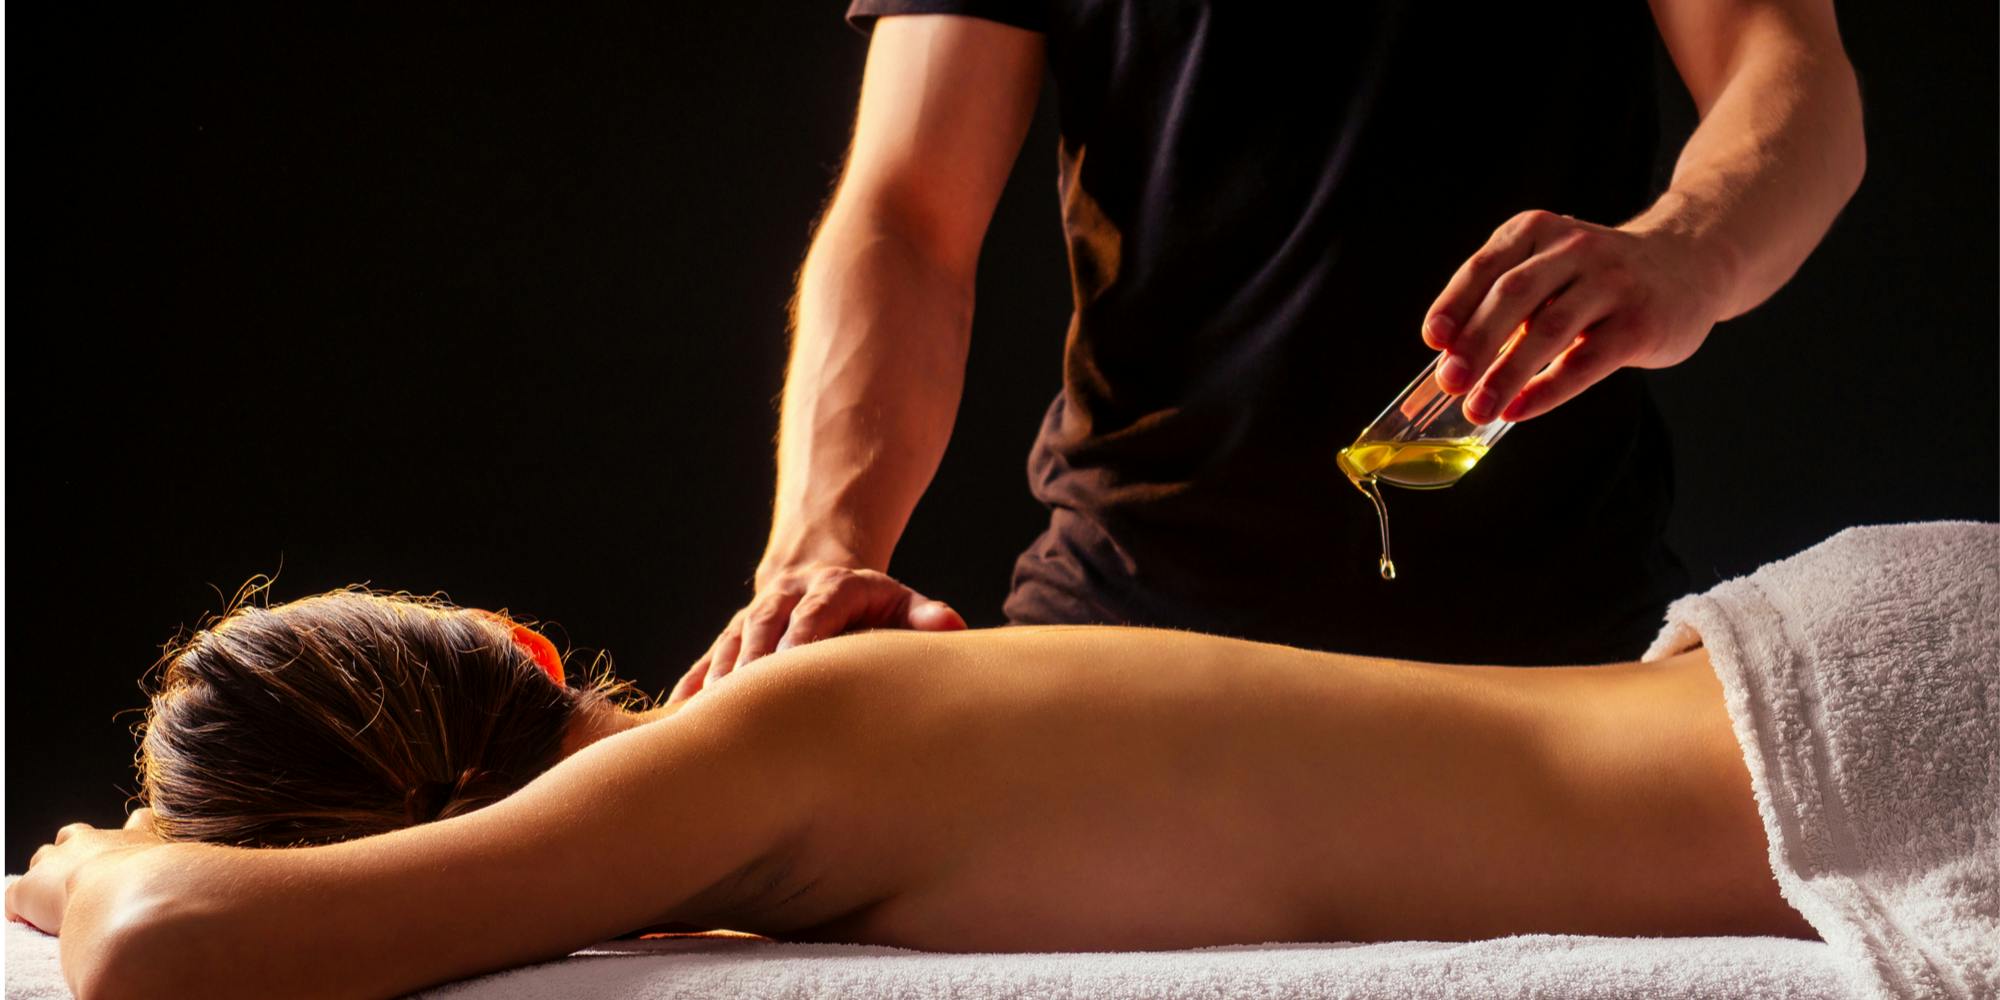 Best massage oils for sensual foreplay